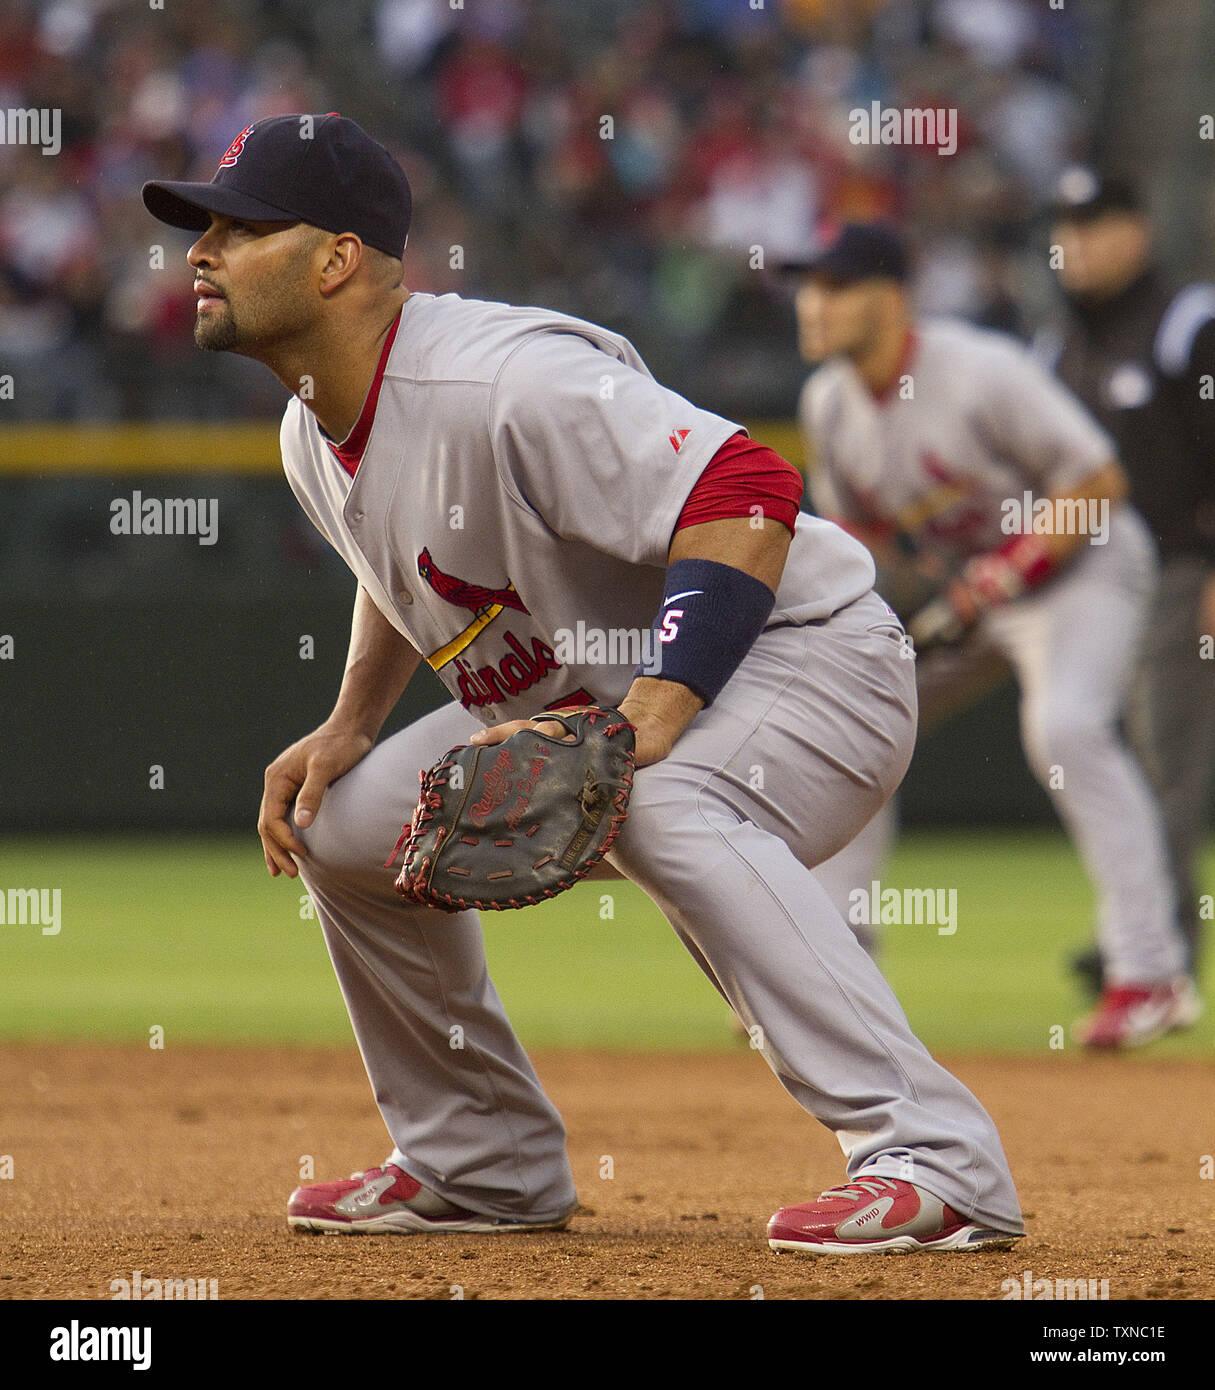 St. Louis Cardinals All-Star first baseman Albert Pujols takes his  defensive stance against the Colorado Rockies at Coors Field on July 7, 2010  in Denver. Colorado beat St. Louis 8-7. UPI/Gary C.